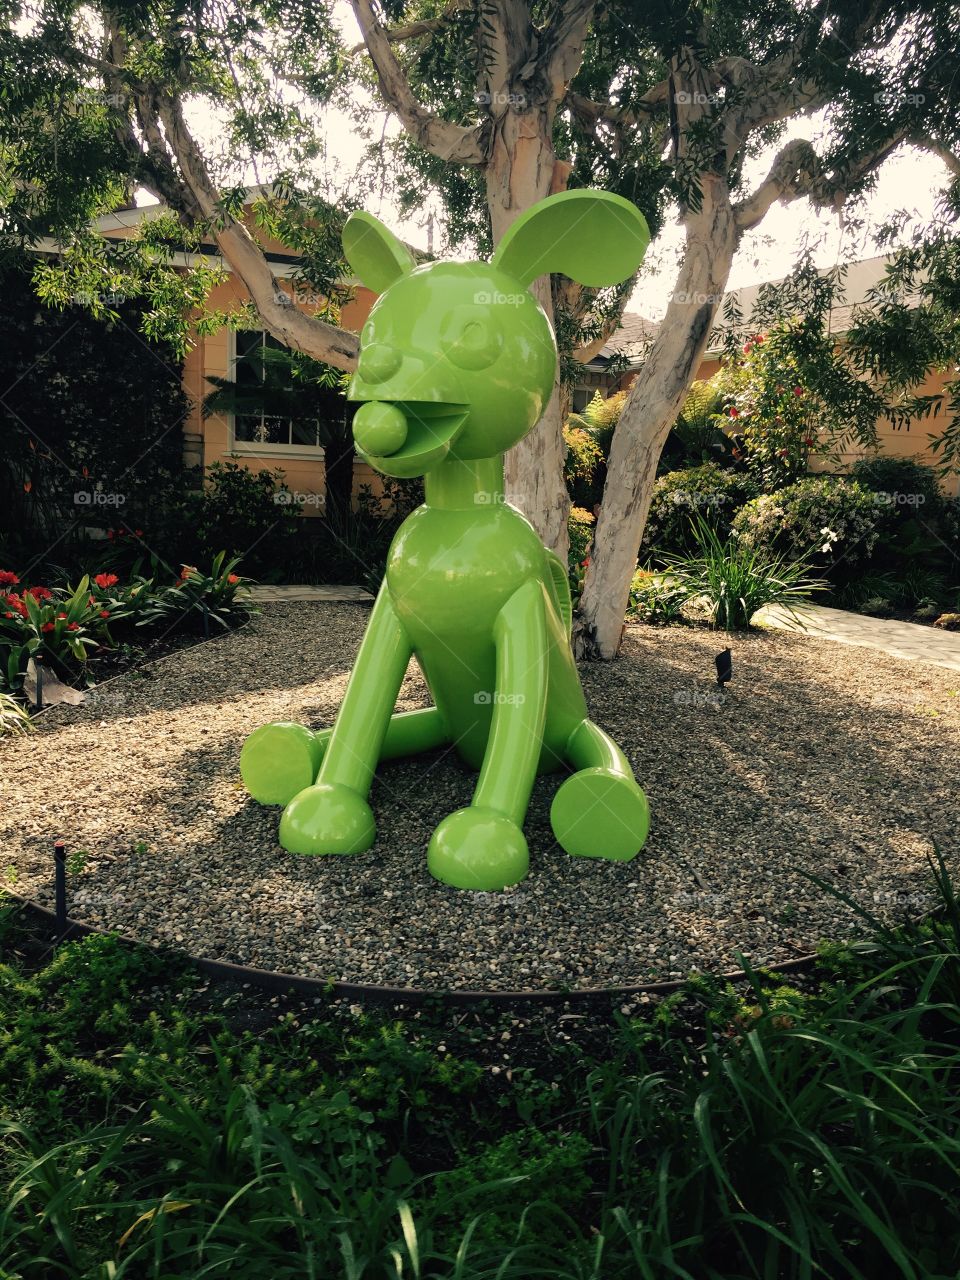 Pluto in someone's yard...